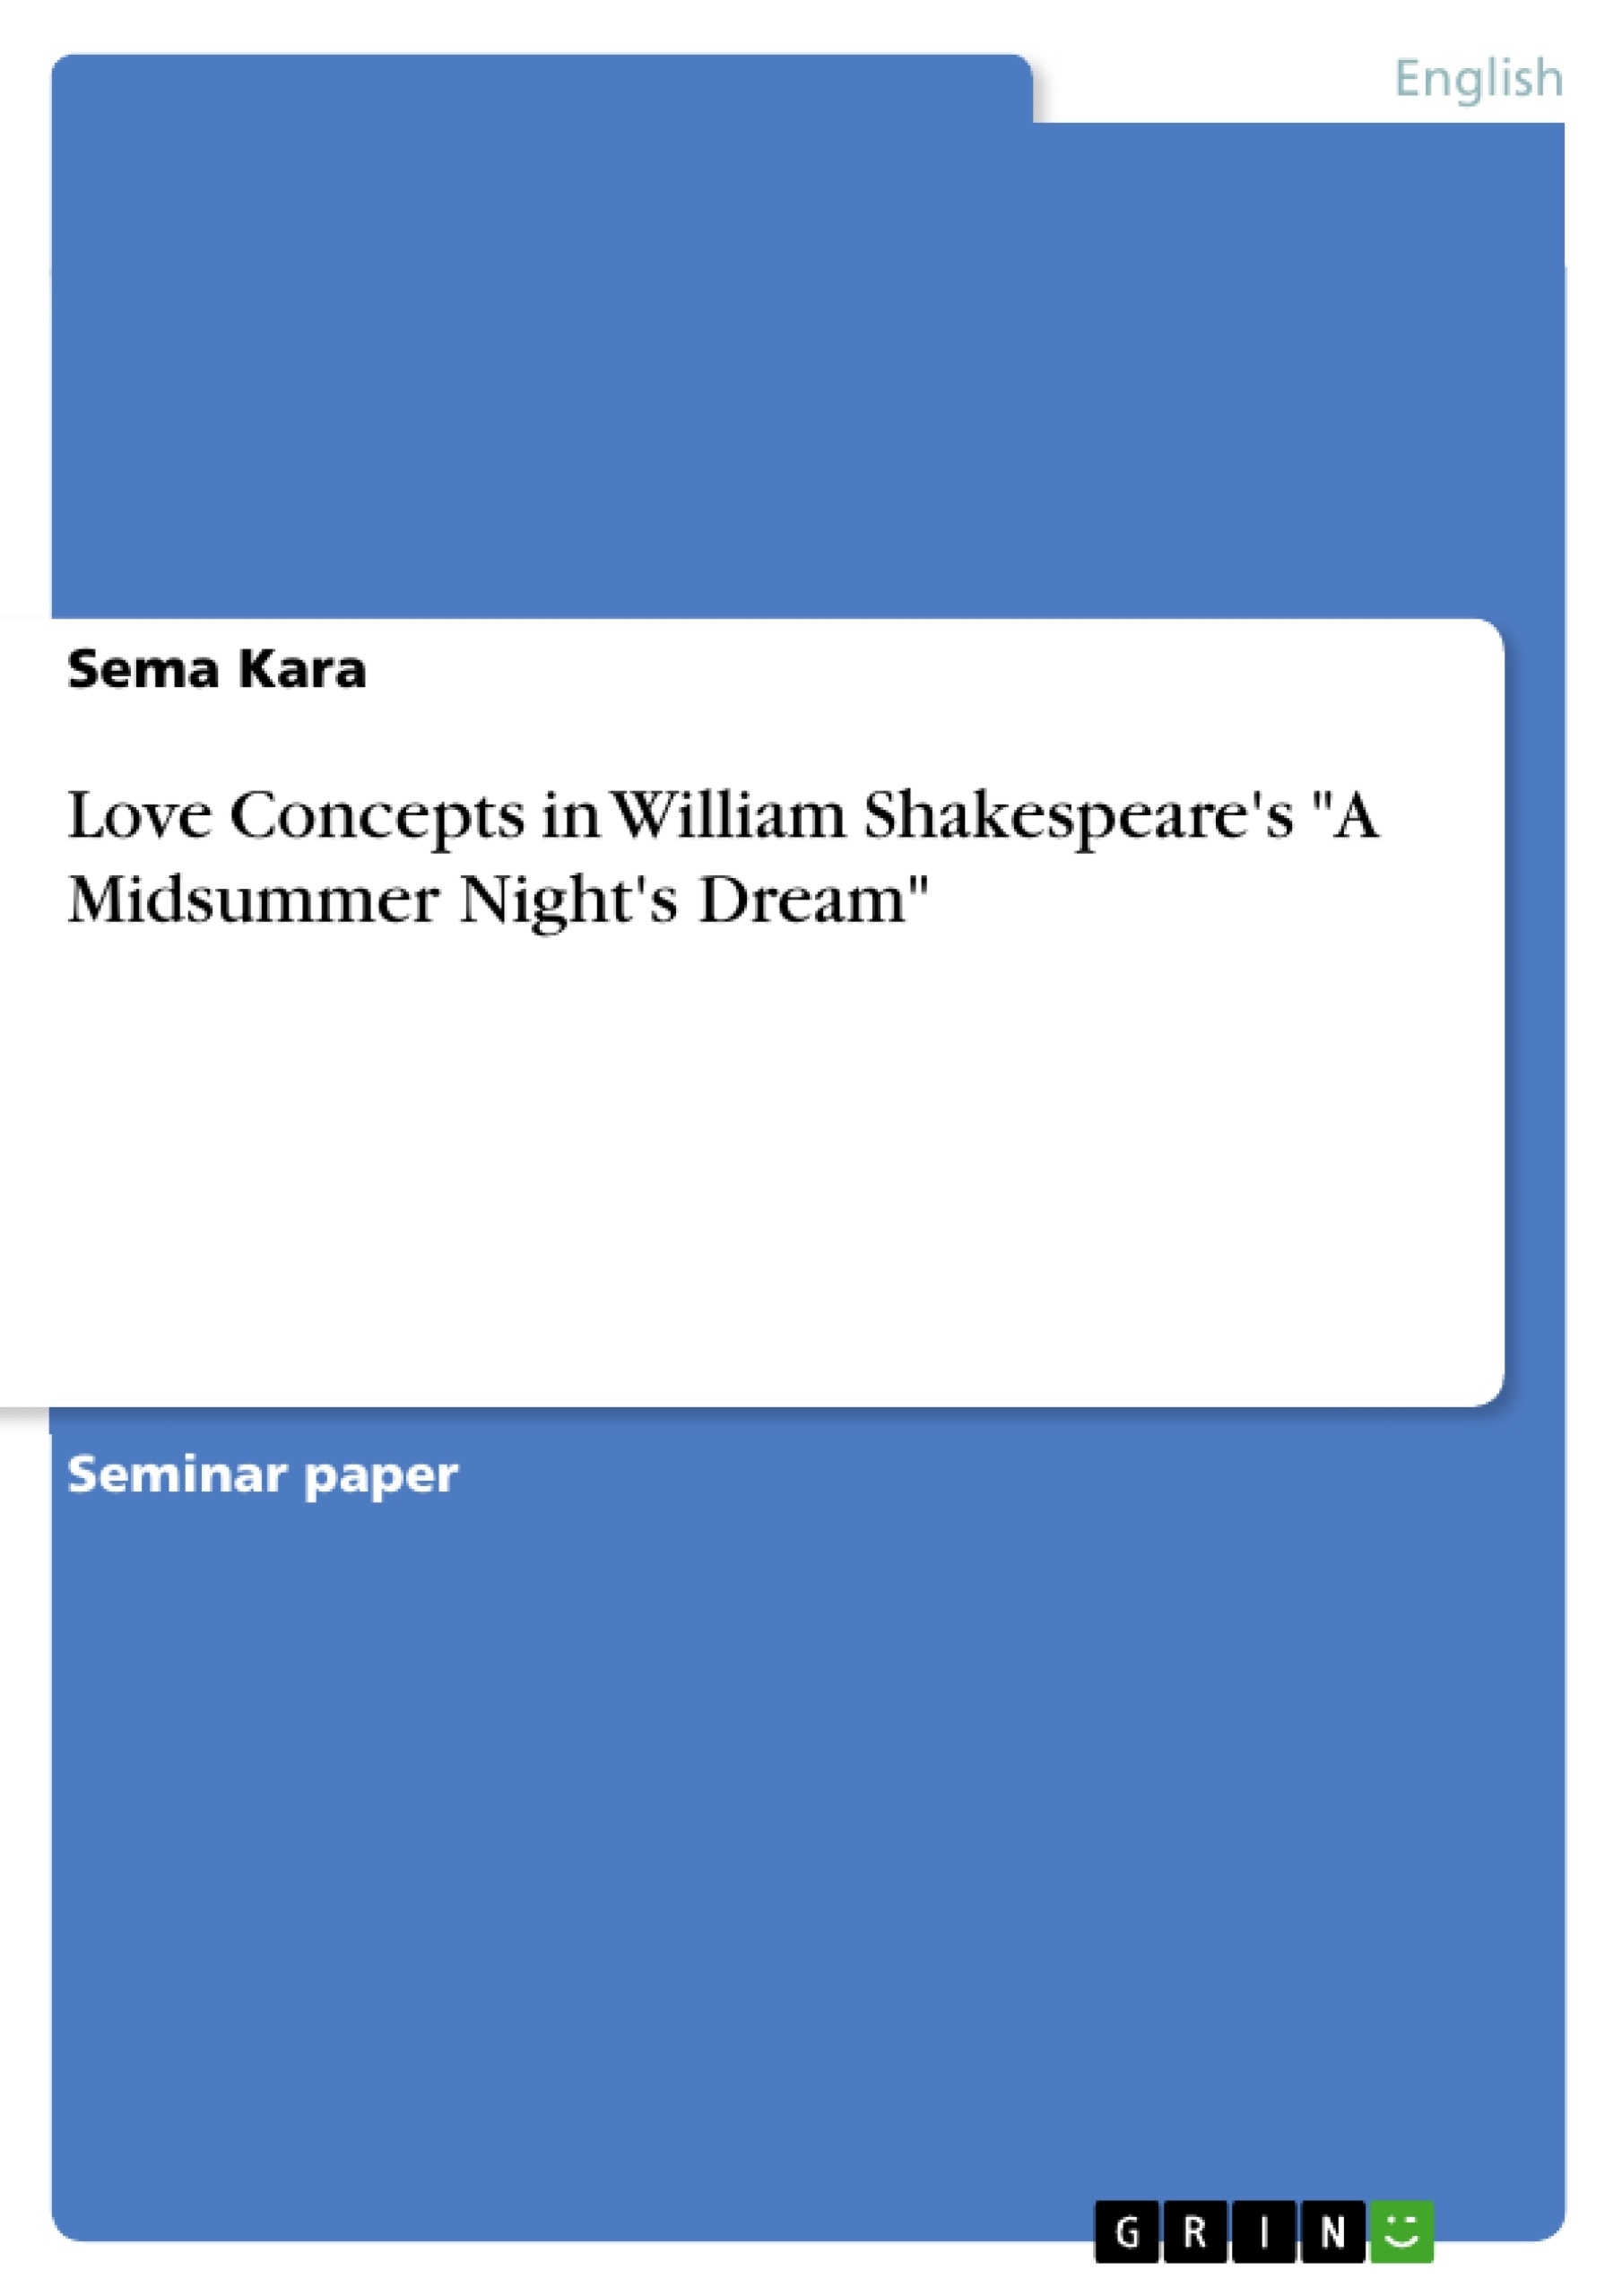 Title: Love Concepts in William Shakespeare's "A Midsummer Night's Dream"